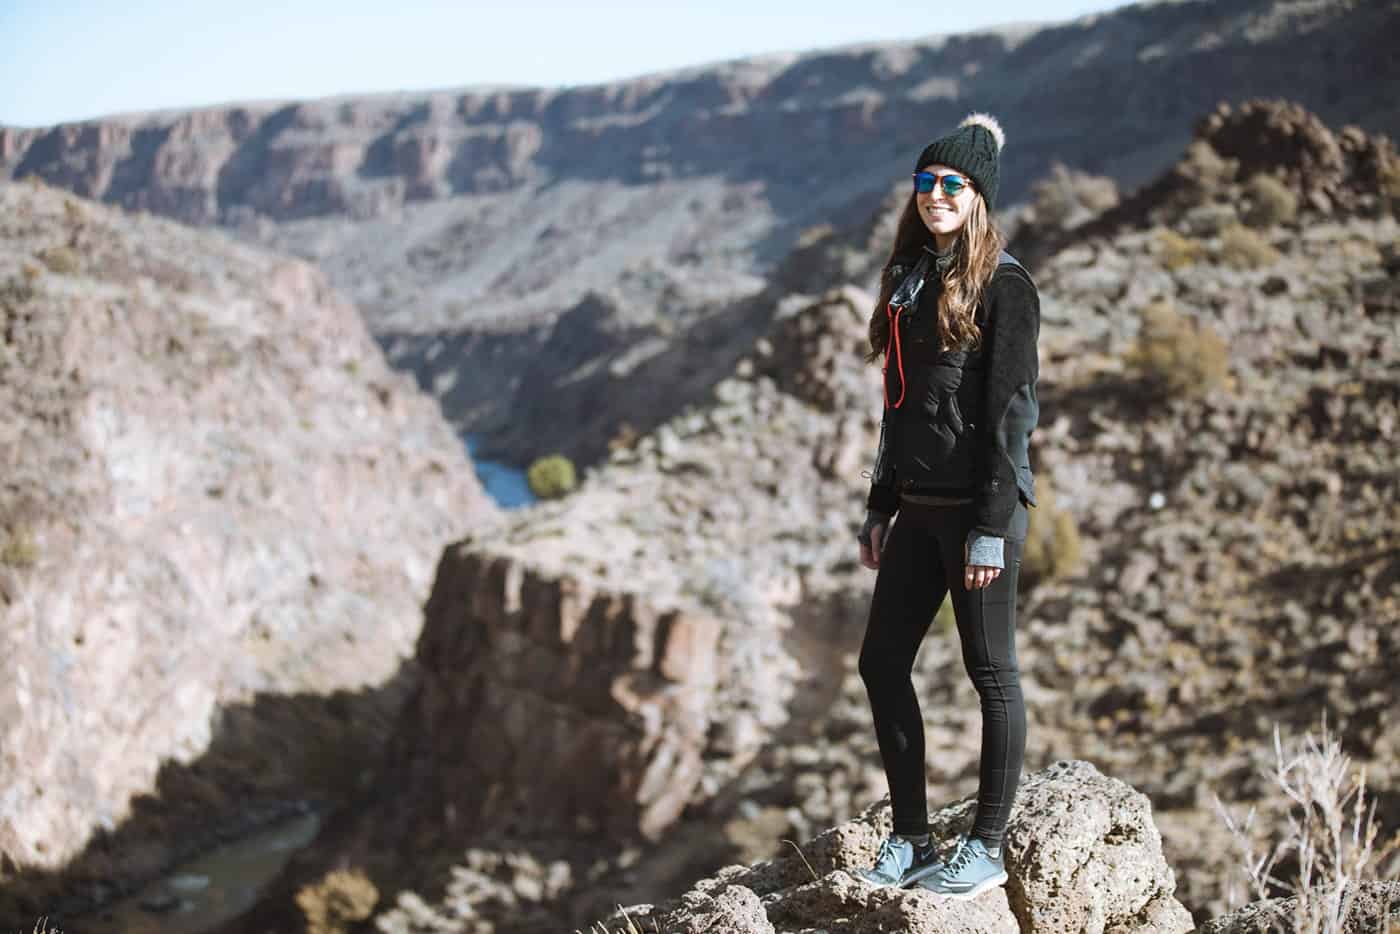 activewear for winter - hiking in taos new mexico. Target Leggings, patagonia fleece + beanie